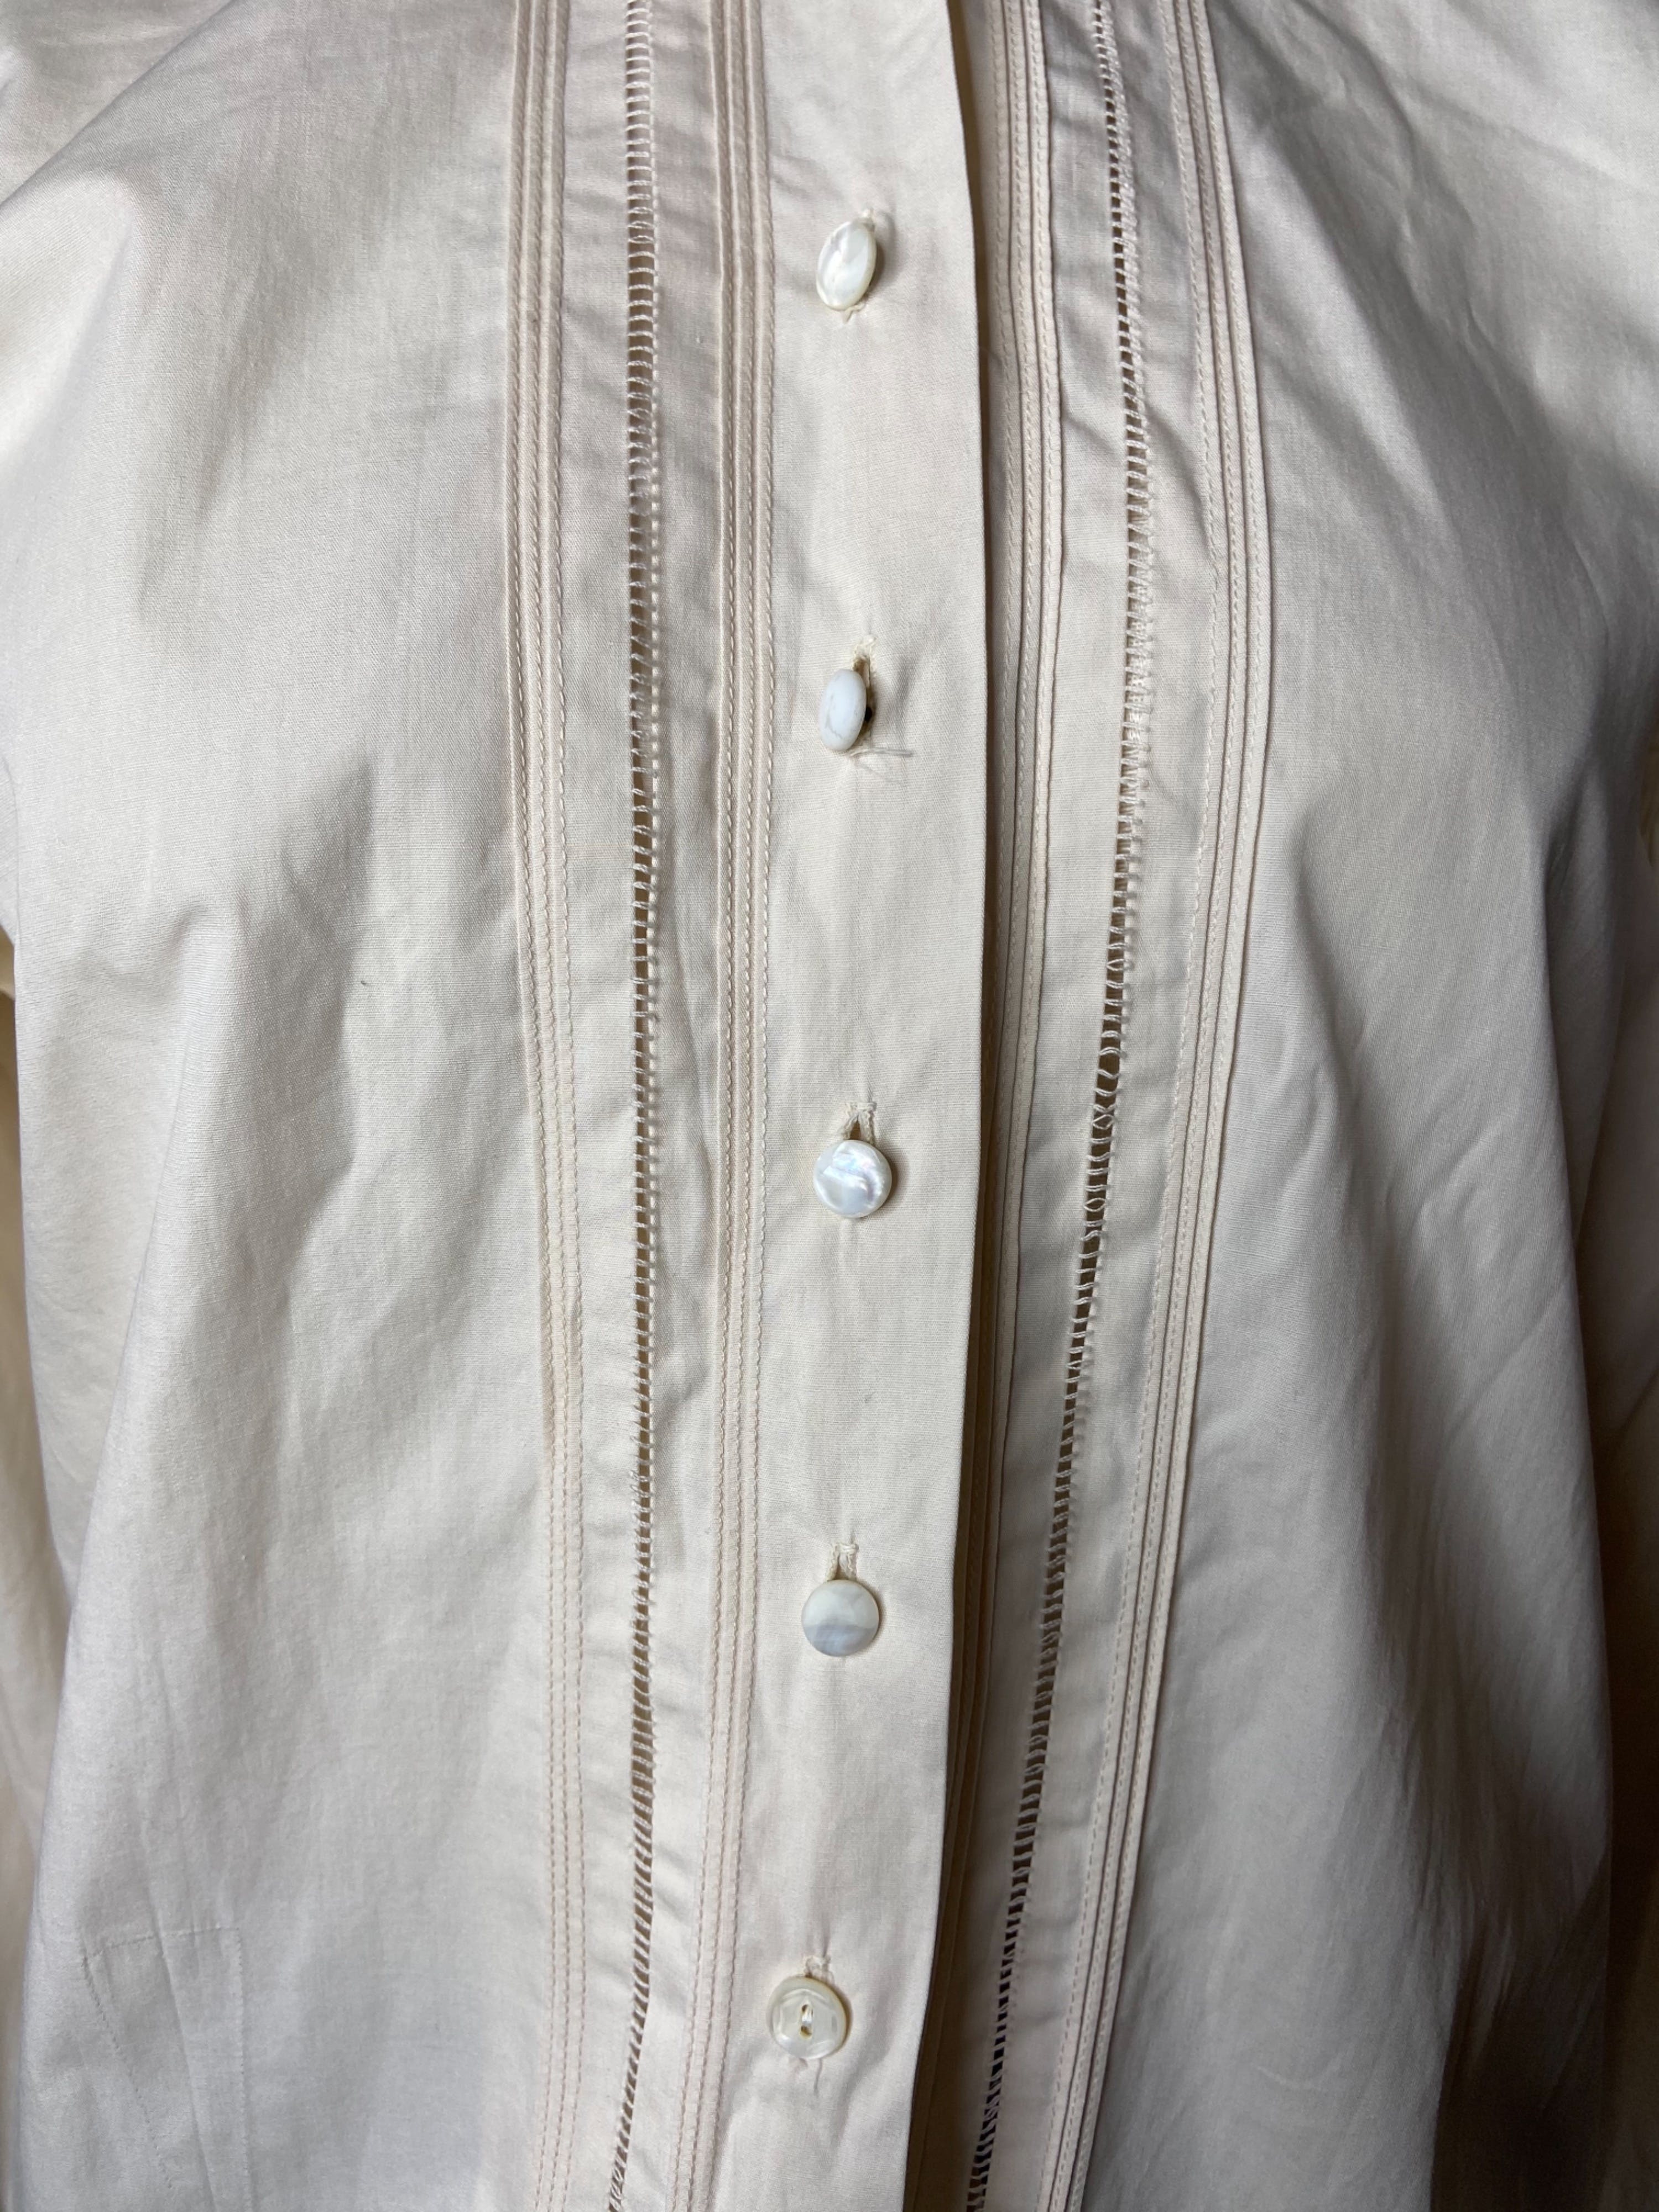 Vintage Button Up Eyelet Detail Blouse by Ship'n Shore | Shop THRILLING